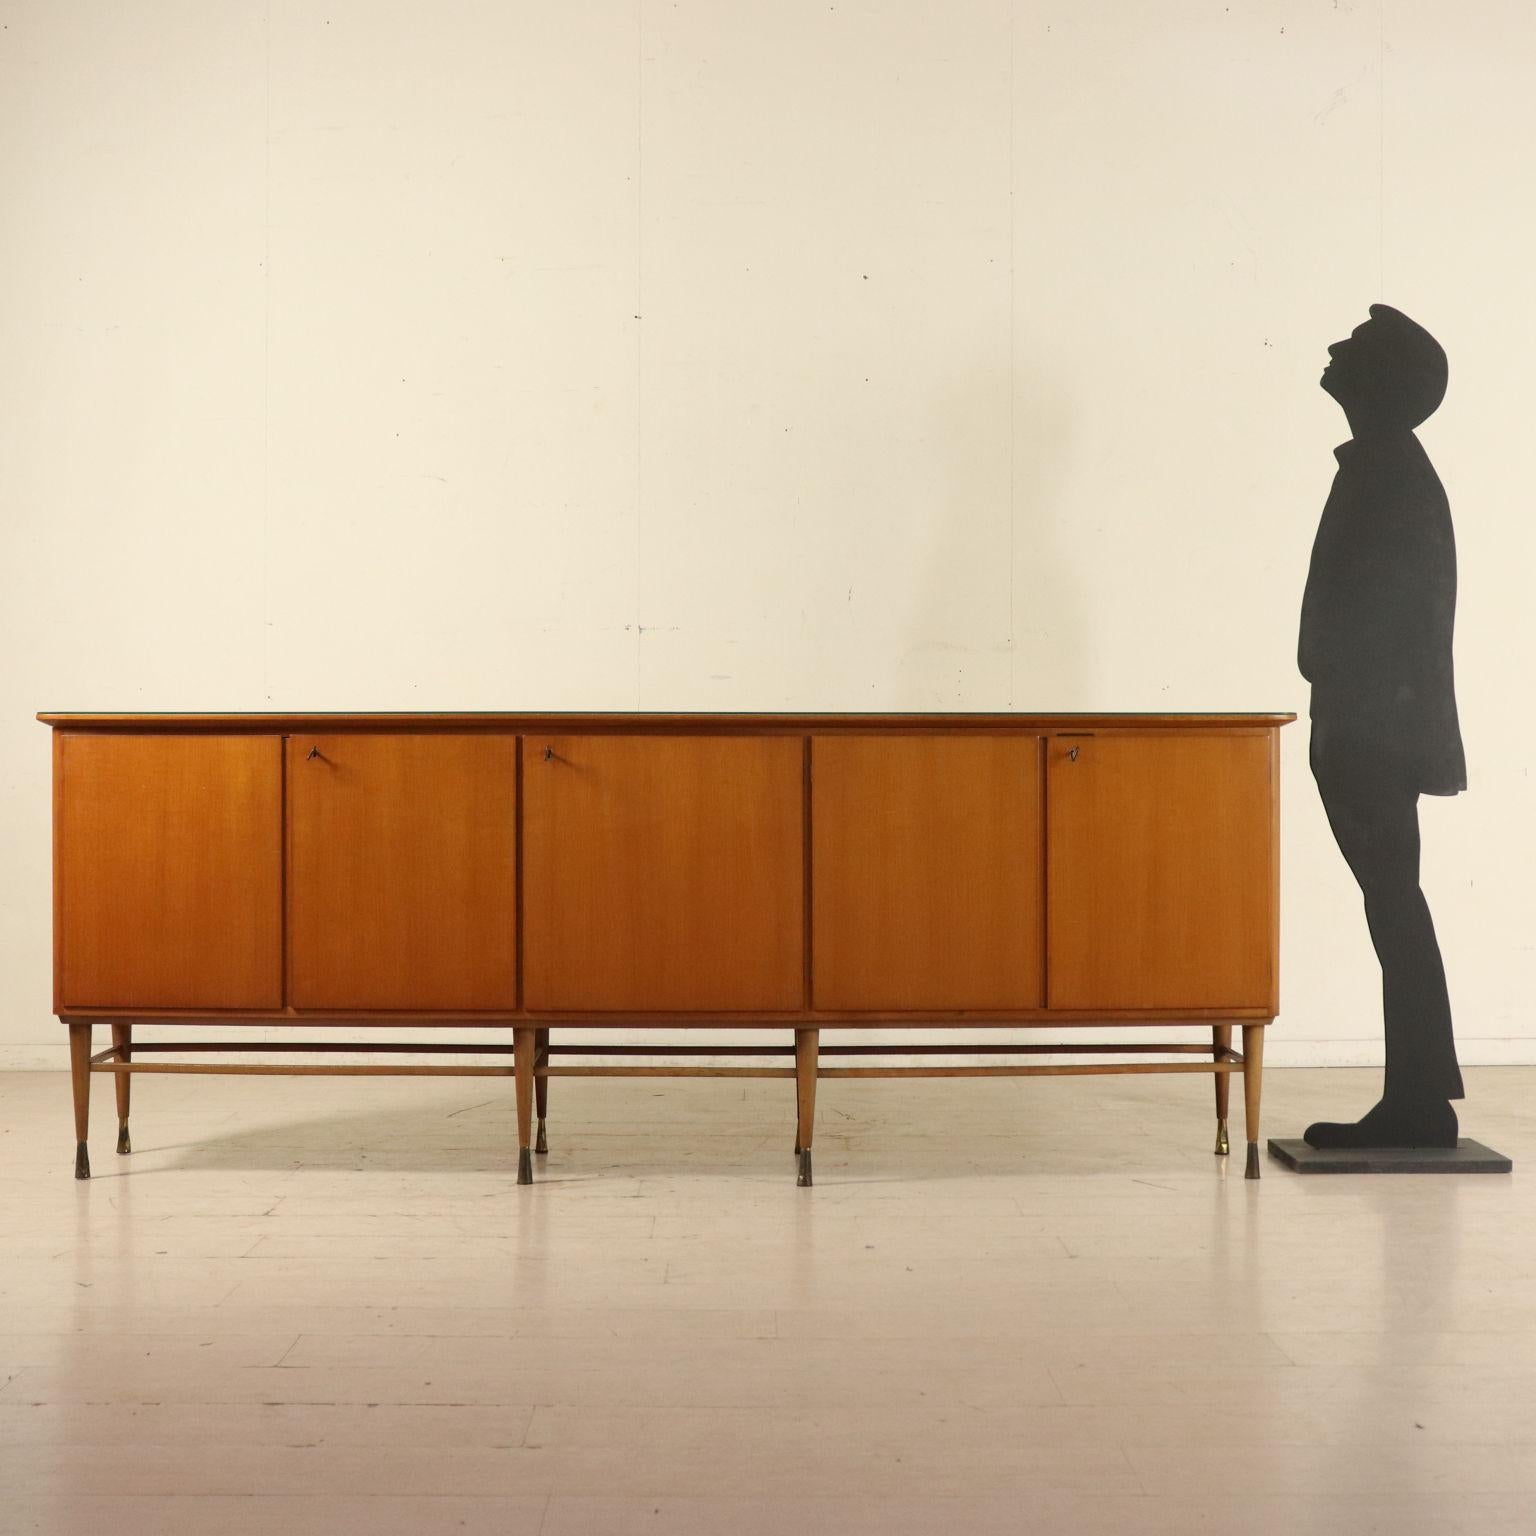 A buffet, mahogany veneer, transparent glass on the top, legs with brass ferrules. Manufactured in Italy, 1950s.